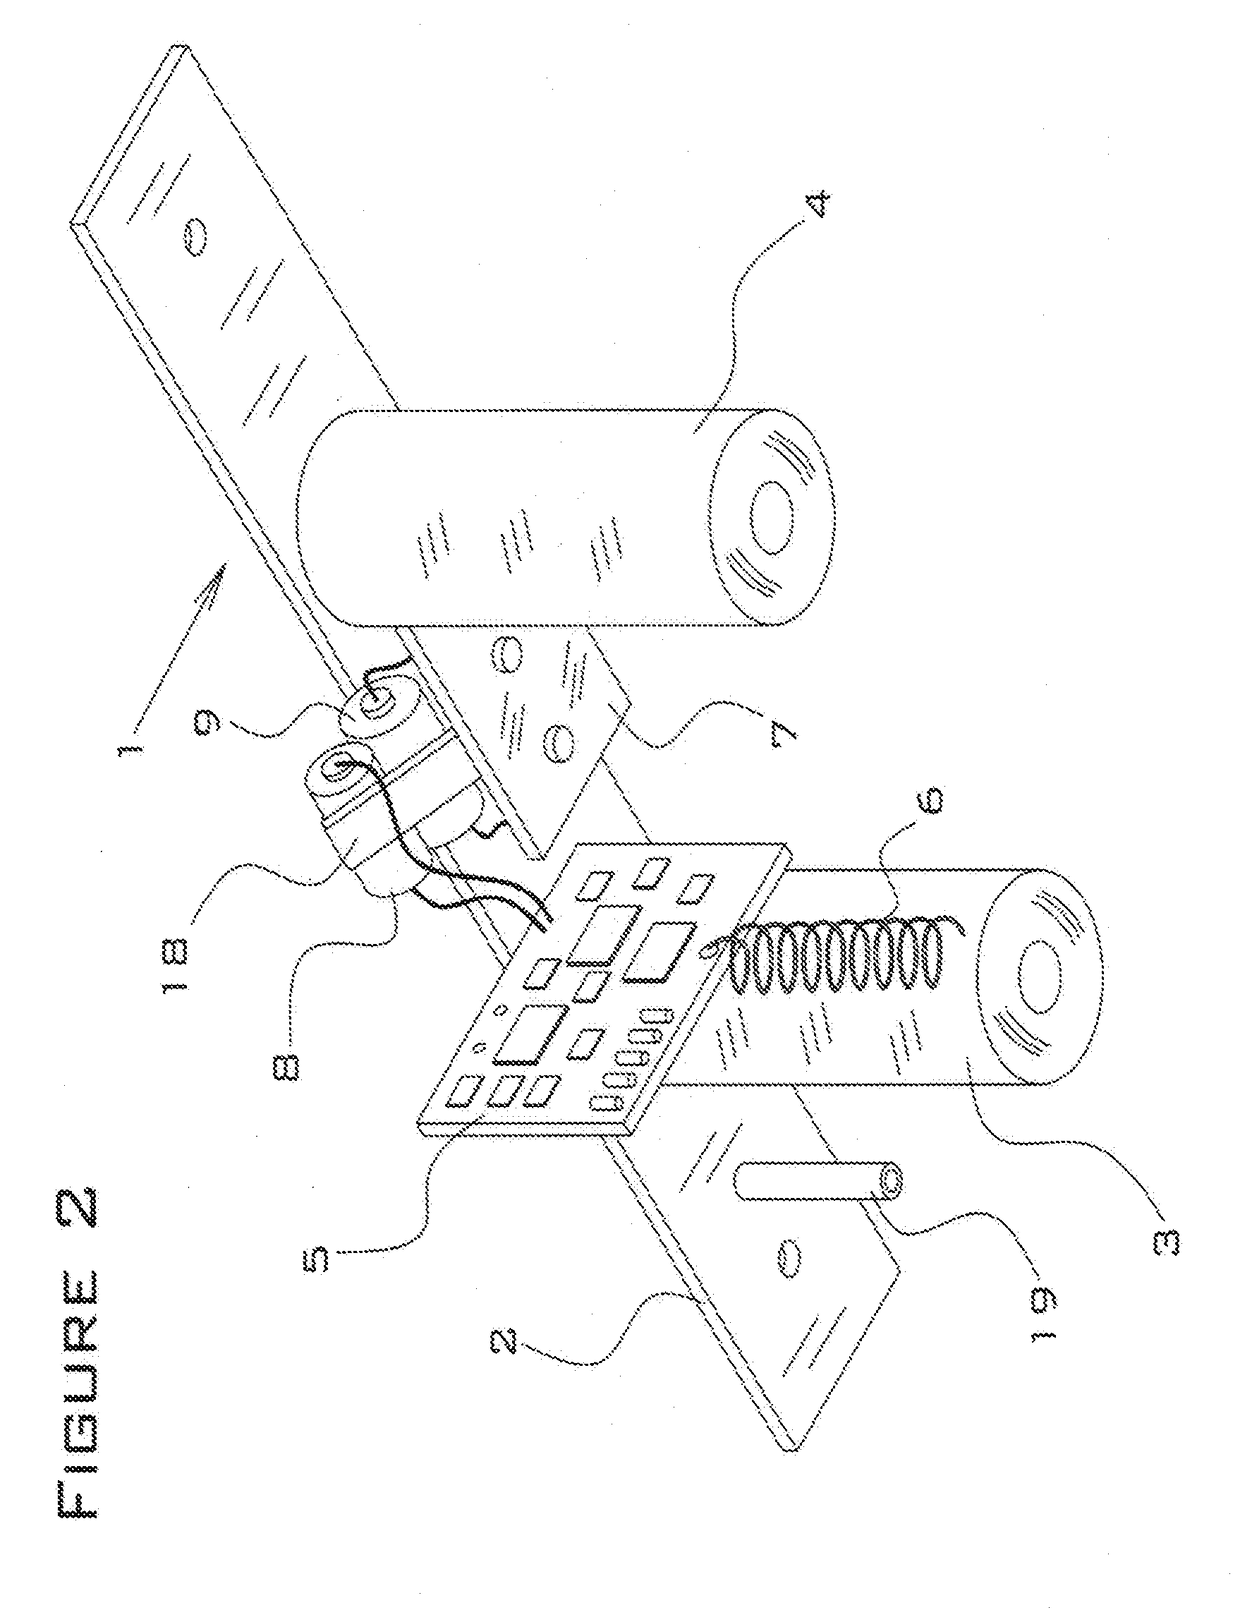 Uav-mounted dispersant device with electronic triggering mechanism